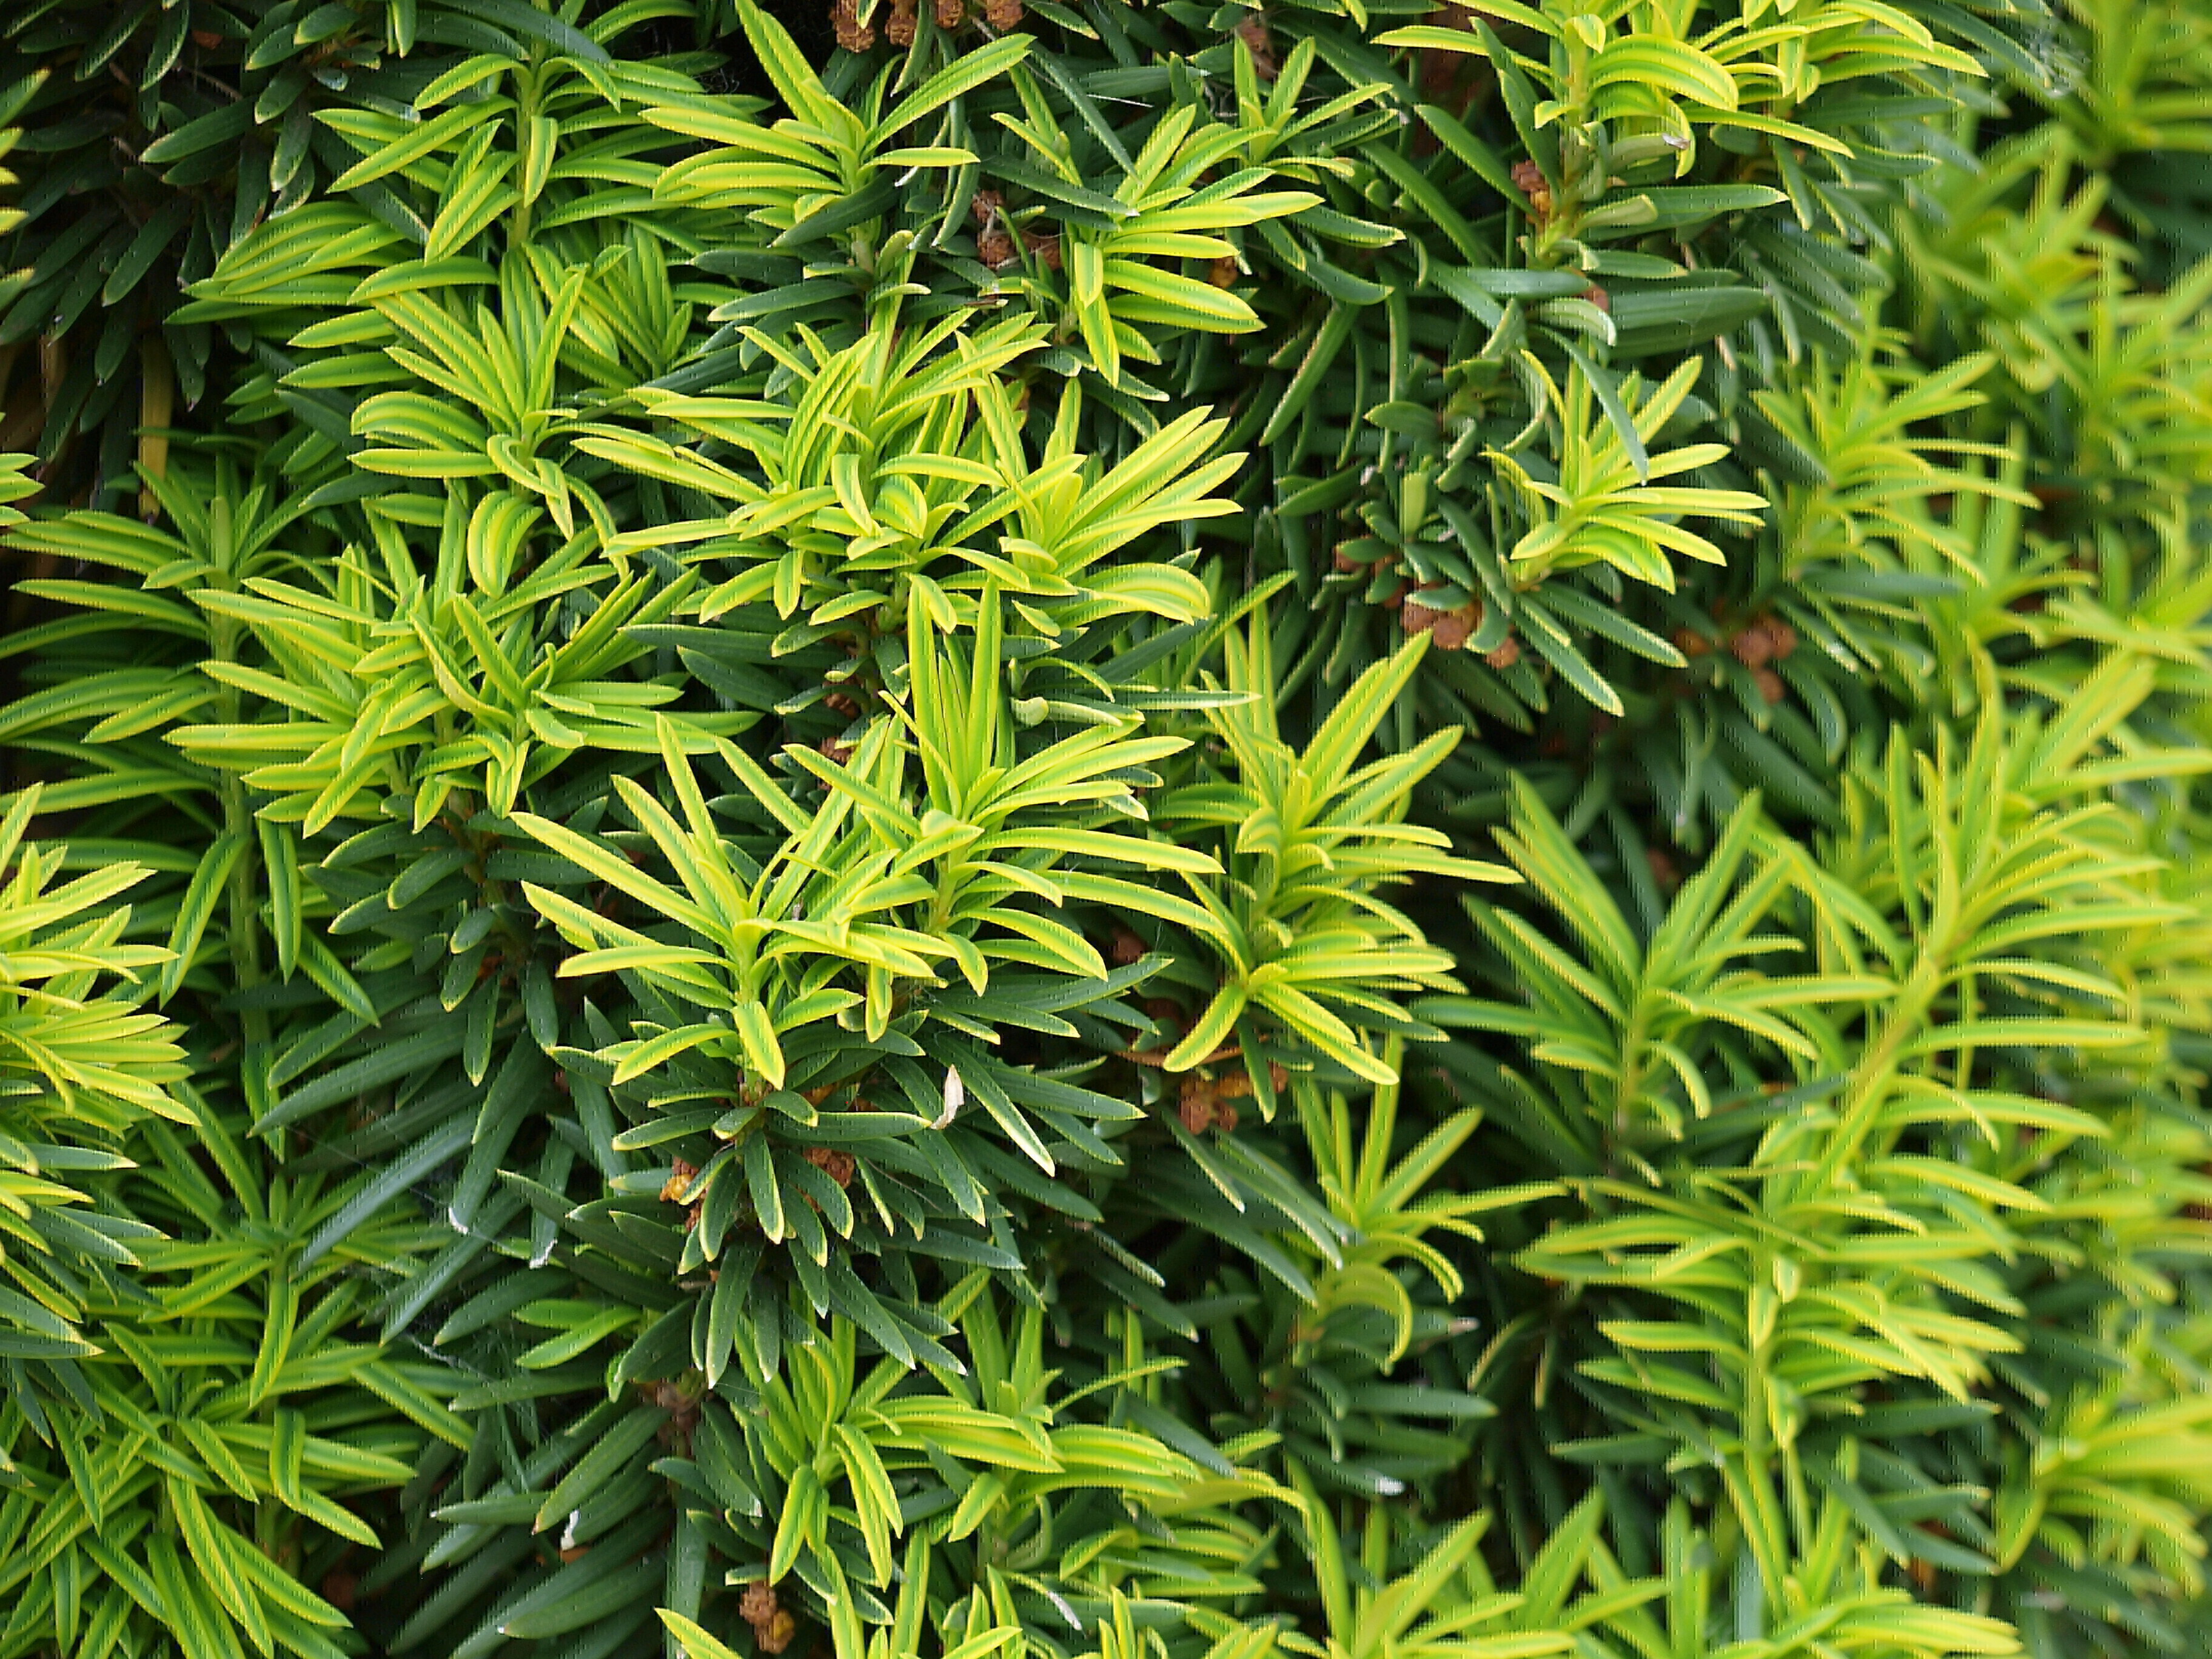 Baccata taxus